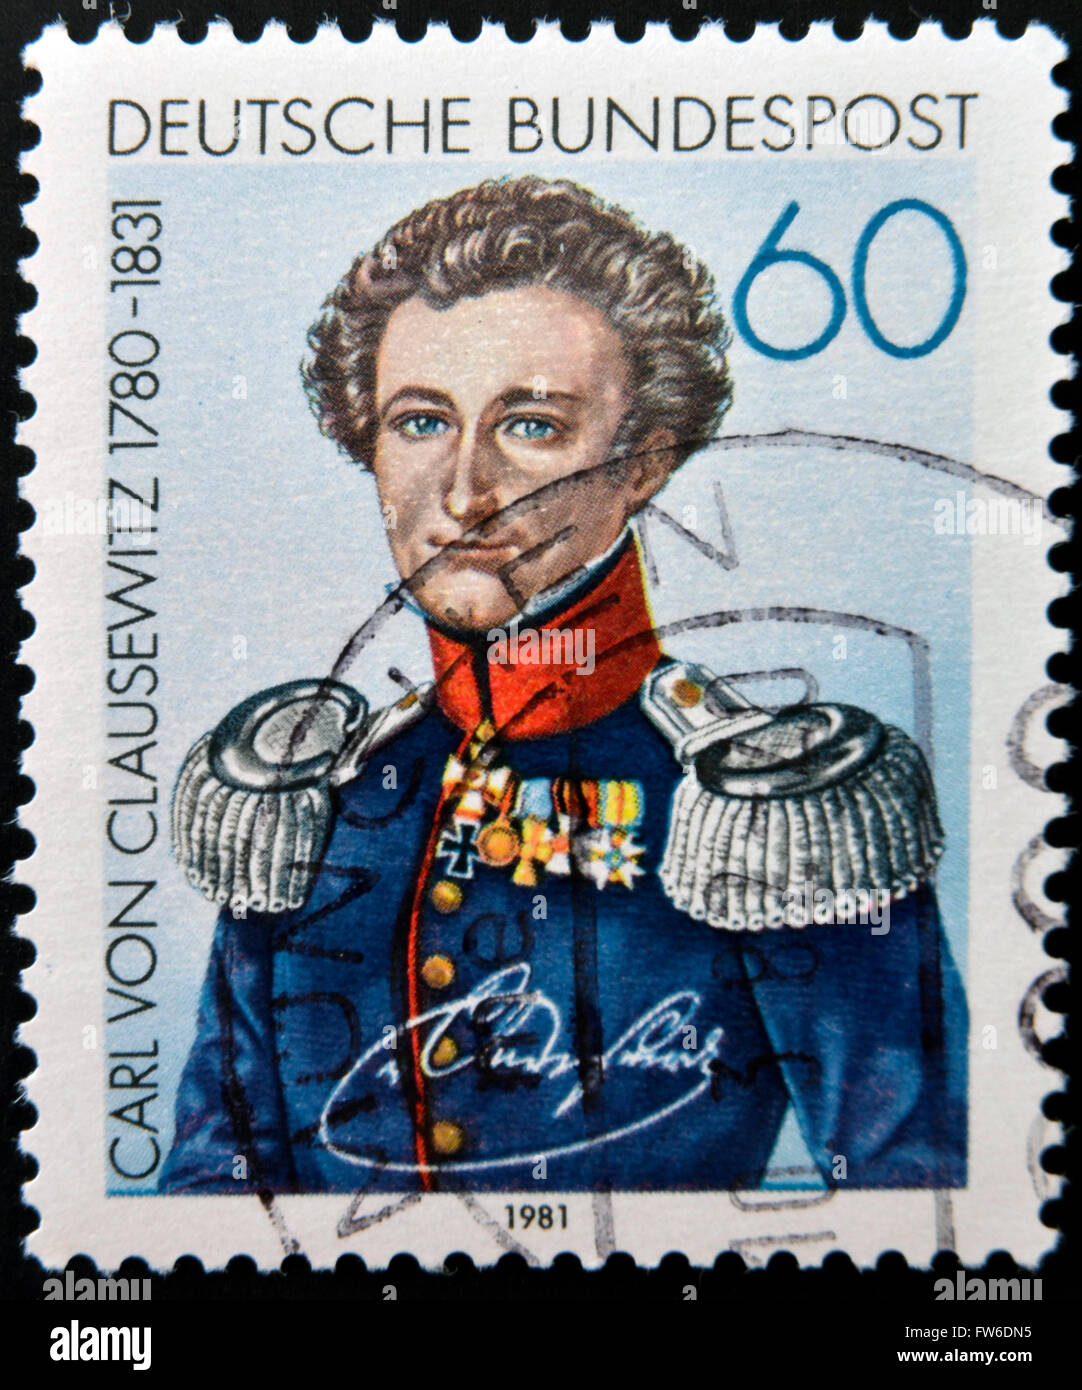 GERMANY- CIRCA 1981: A stamp printed in Germany shows image of the Carl Philipp Gottfried von Clausewitz, circa 1981. Stock Photo